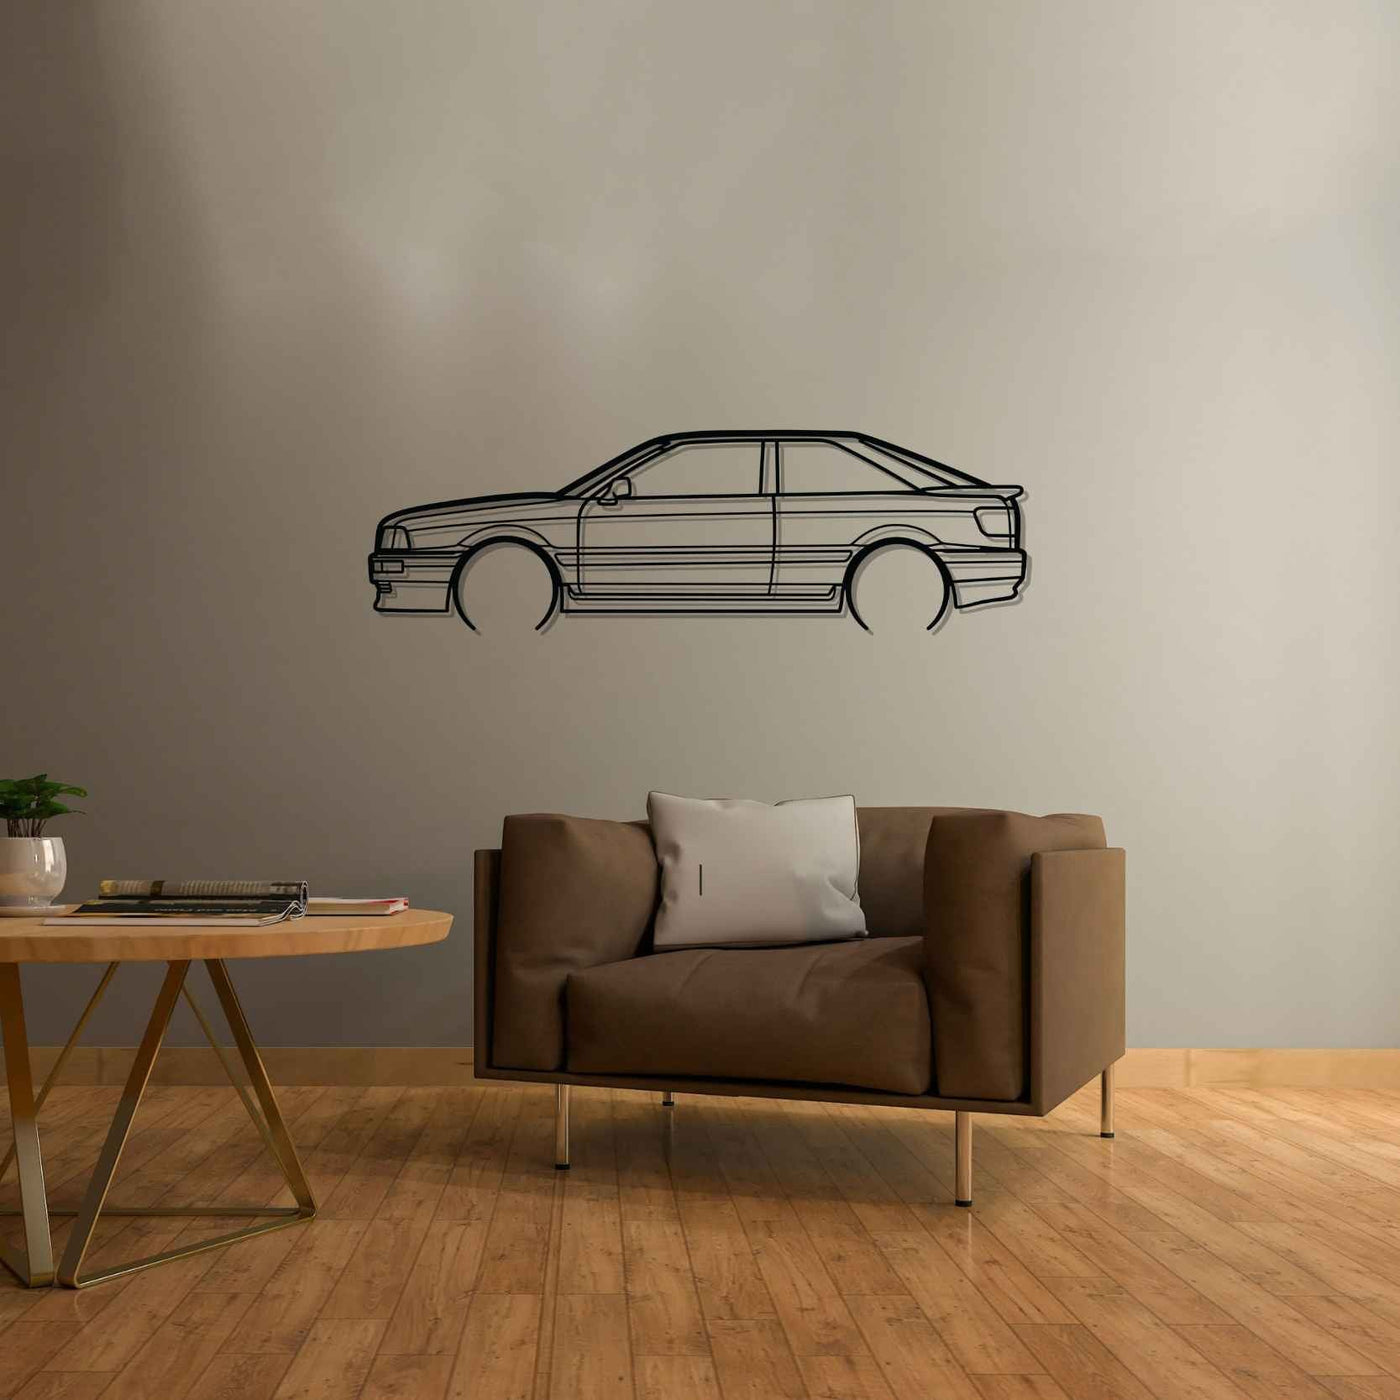 80 Coupe 1992 Detailed Silhouette Metal Wall Art